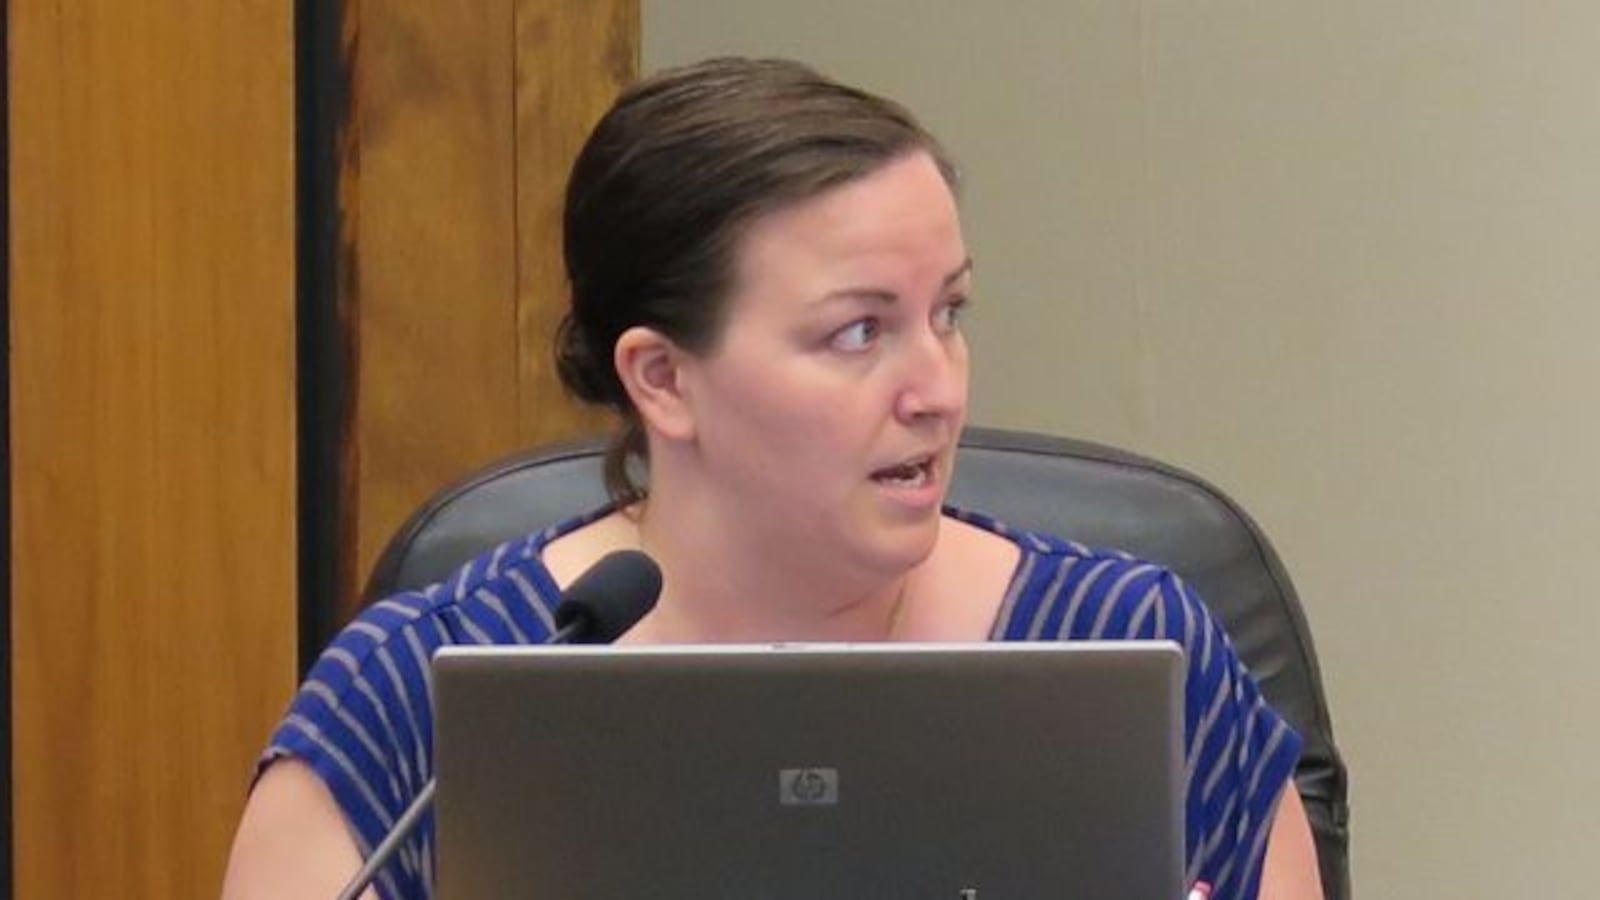 Union leaders and fellow board members questioned a plan for overhauling teacher pay proposed by board member Caitlin Hannon at Tuesday's meeting.